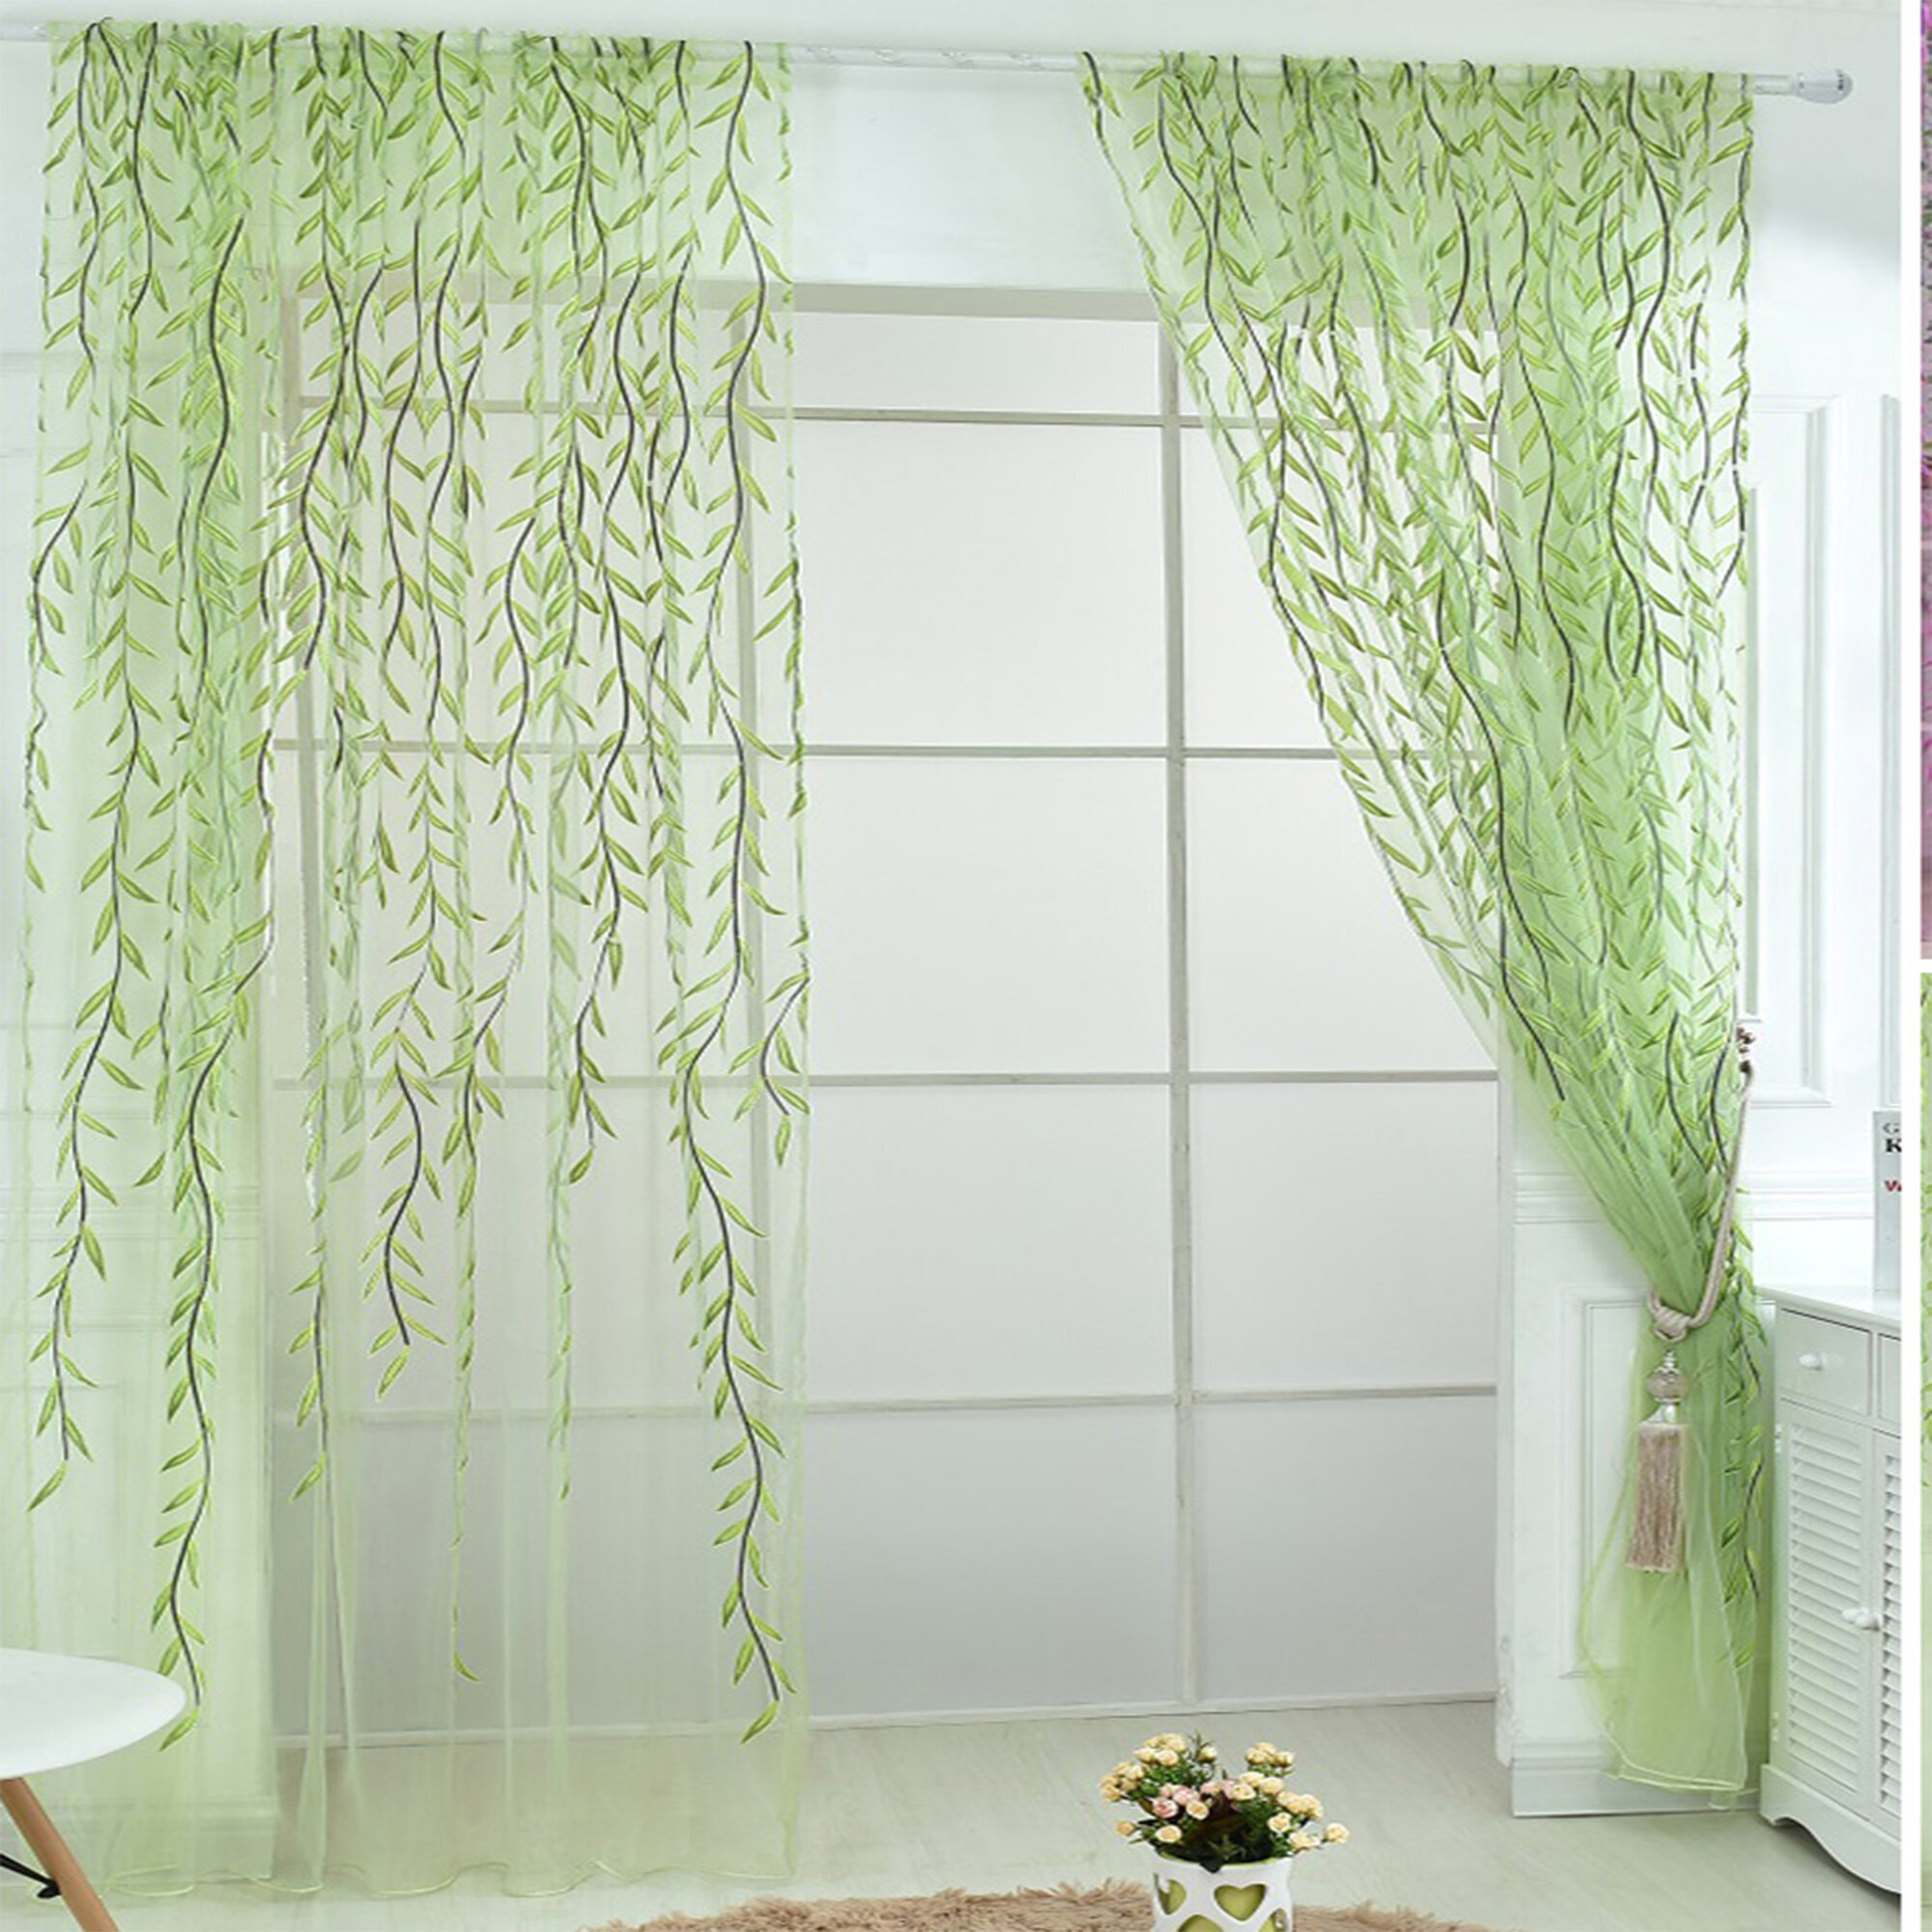 Sheer Curtain Butterfly Tulle Print Panel Window Balcony Door Room Divider CO